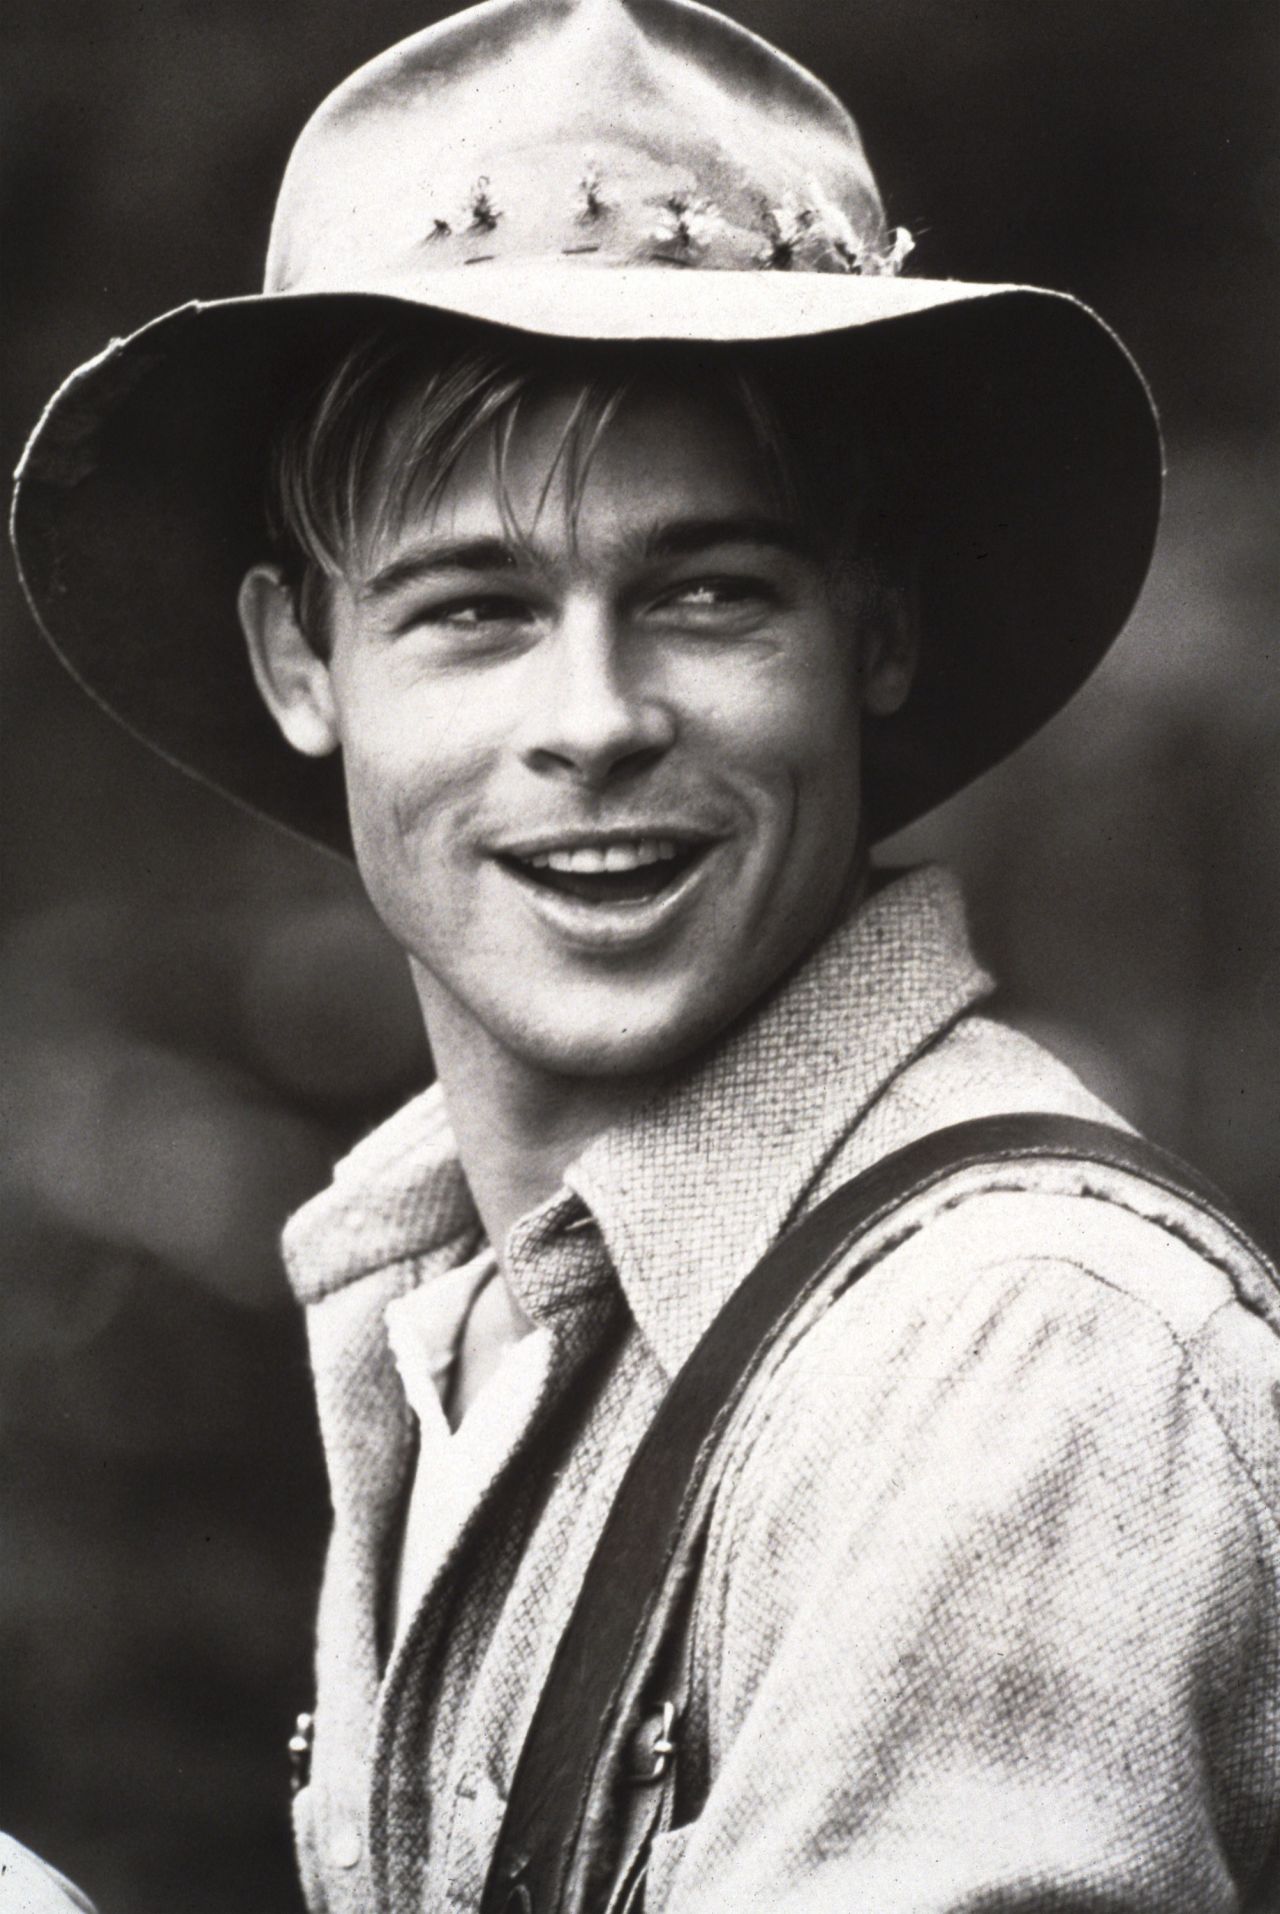 His breakout role came in 1992's "A River Runs Through It," which was directed by Hollywood great Robert Redford. 